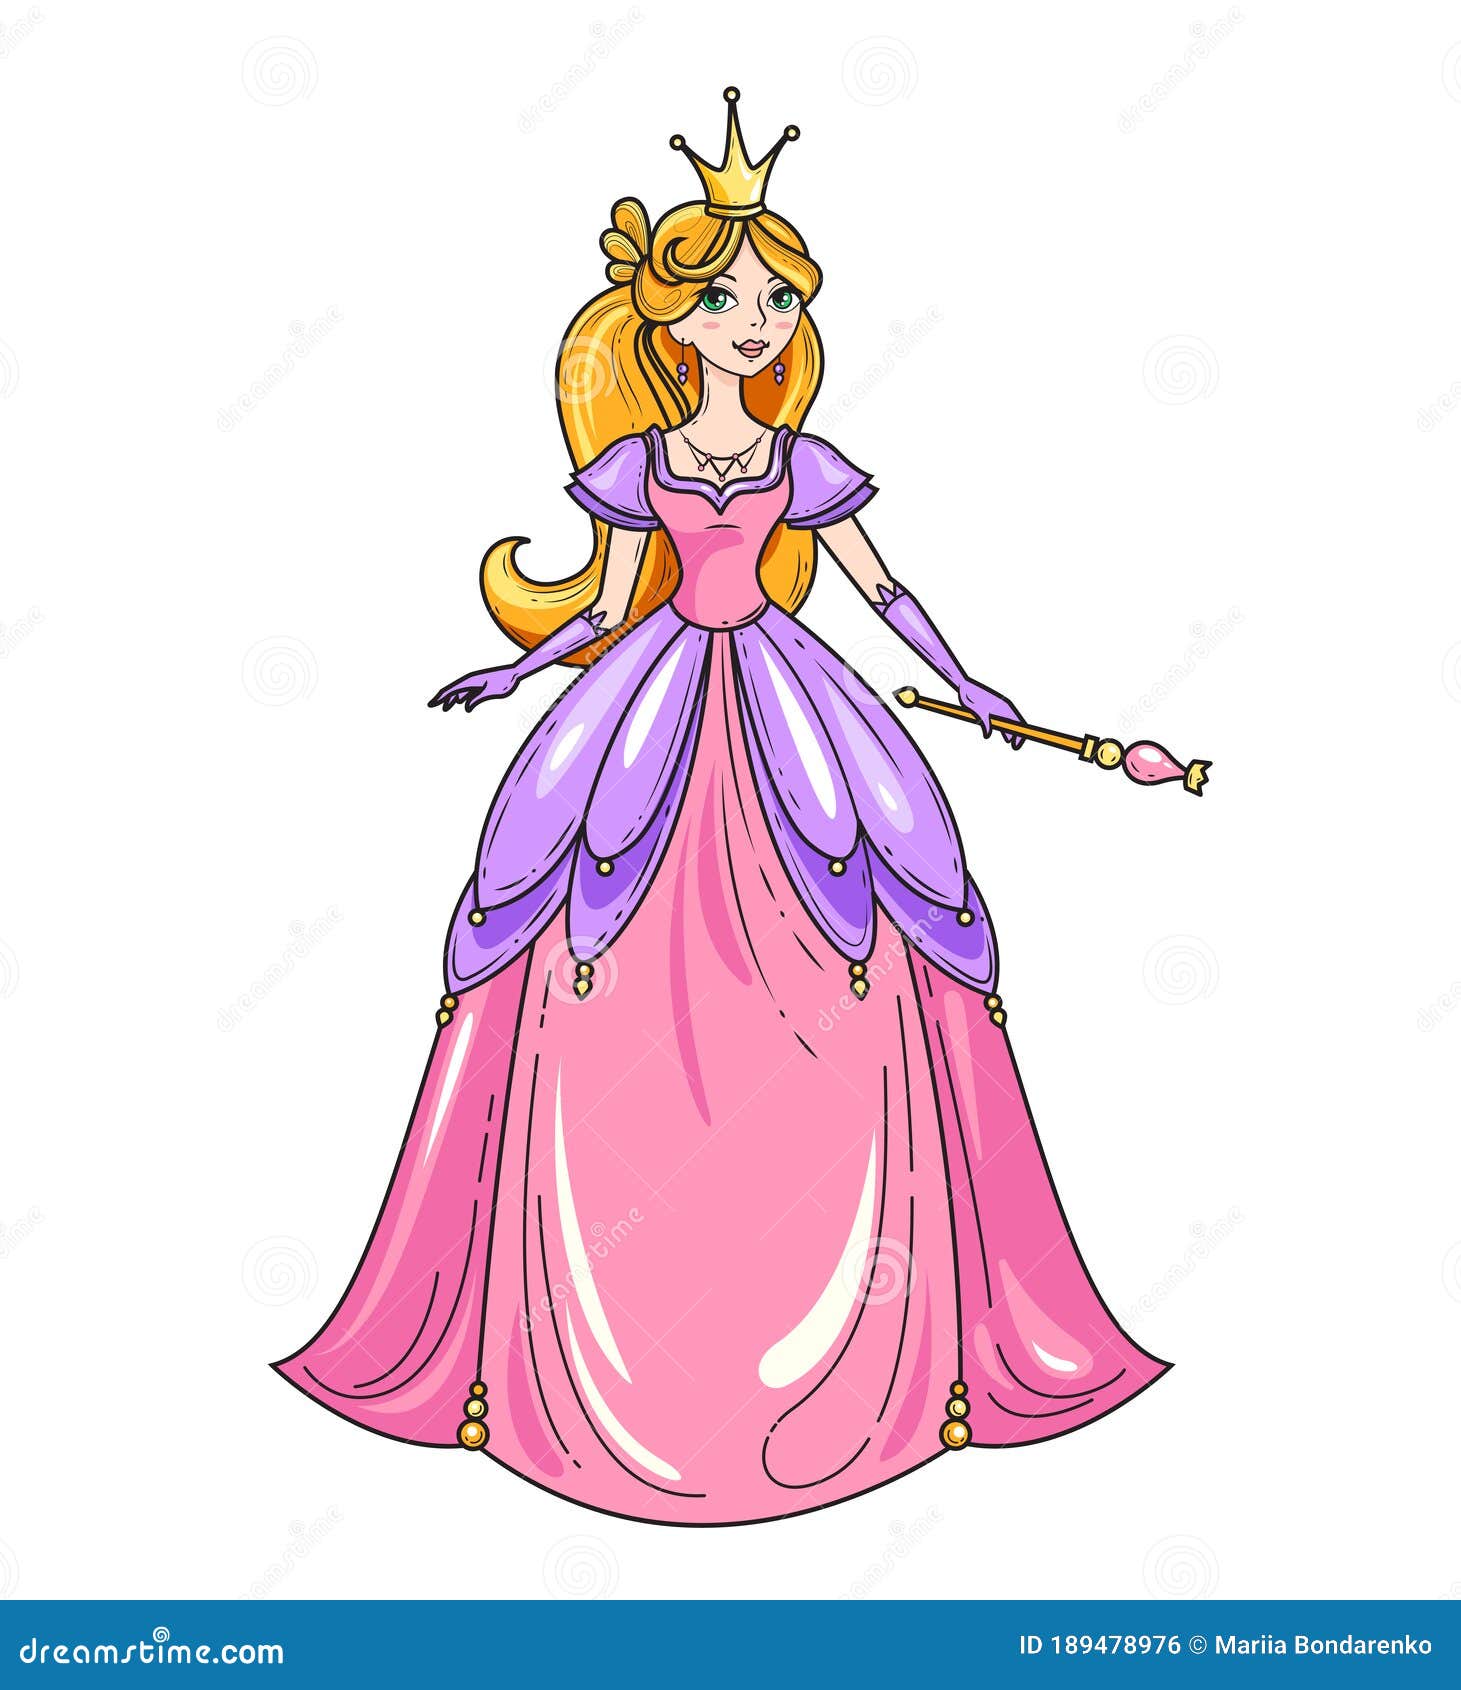 Princess Standing in Beautiful Dress with Magic Wand. Charming Fairy Tale  Girl Stock Vector - Illustration of fashion, cute: 189478976